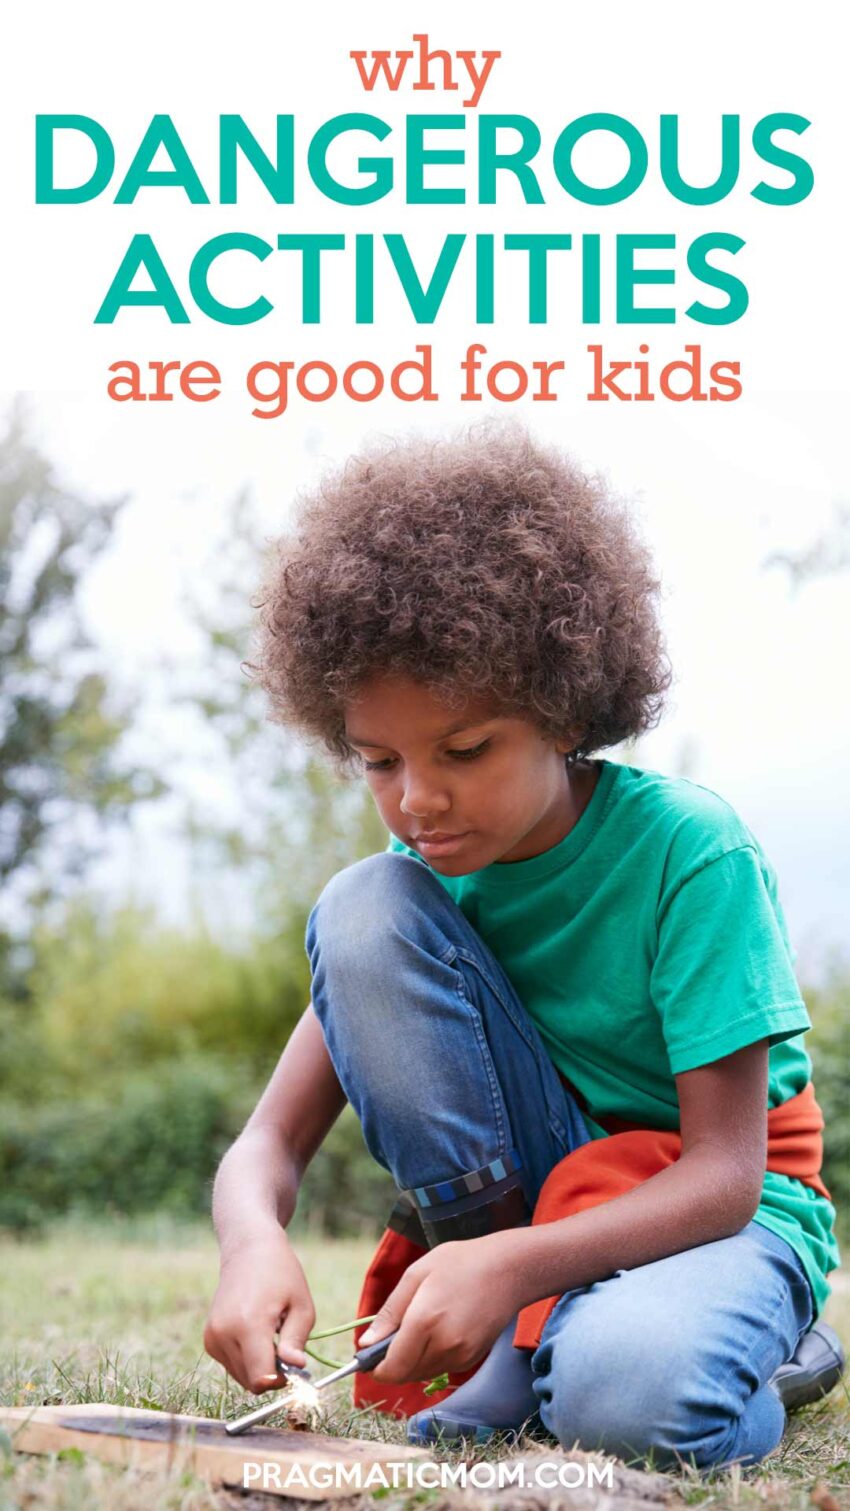 Why Dangerous Activities are Good for Kids